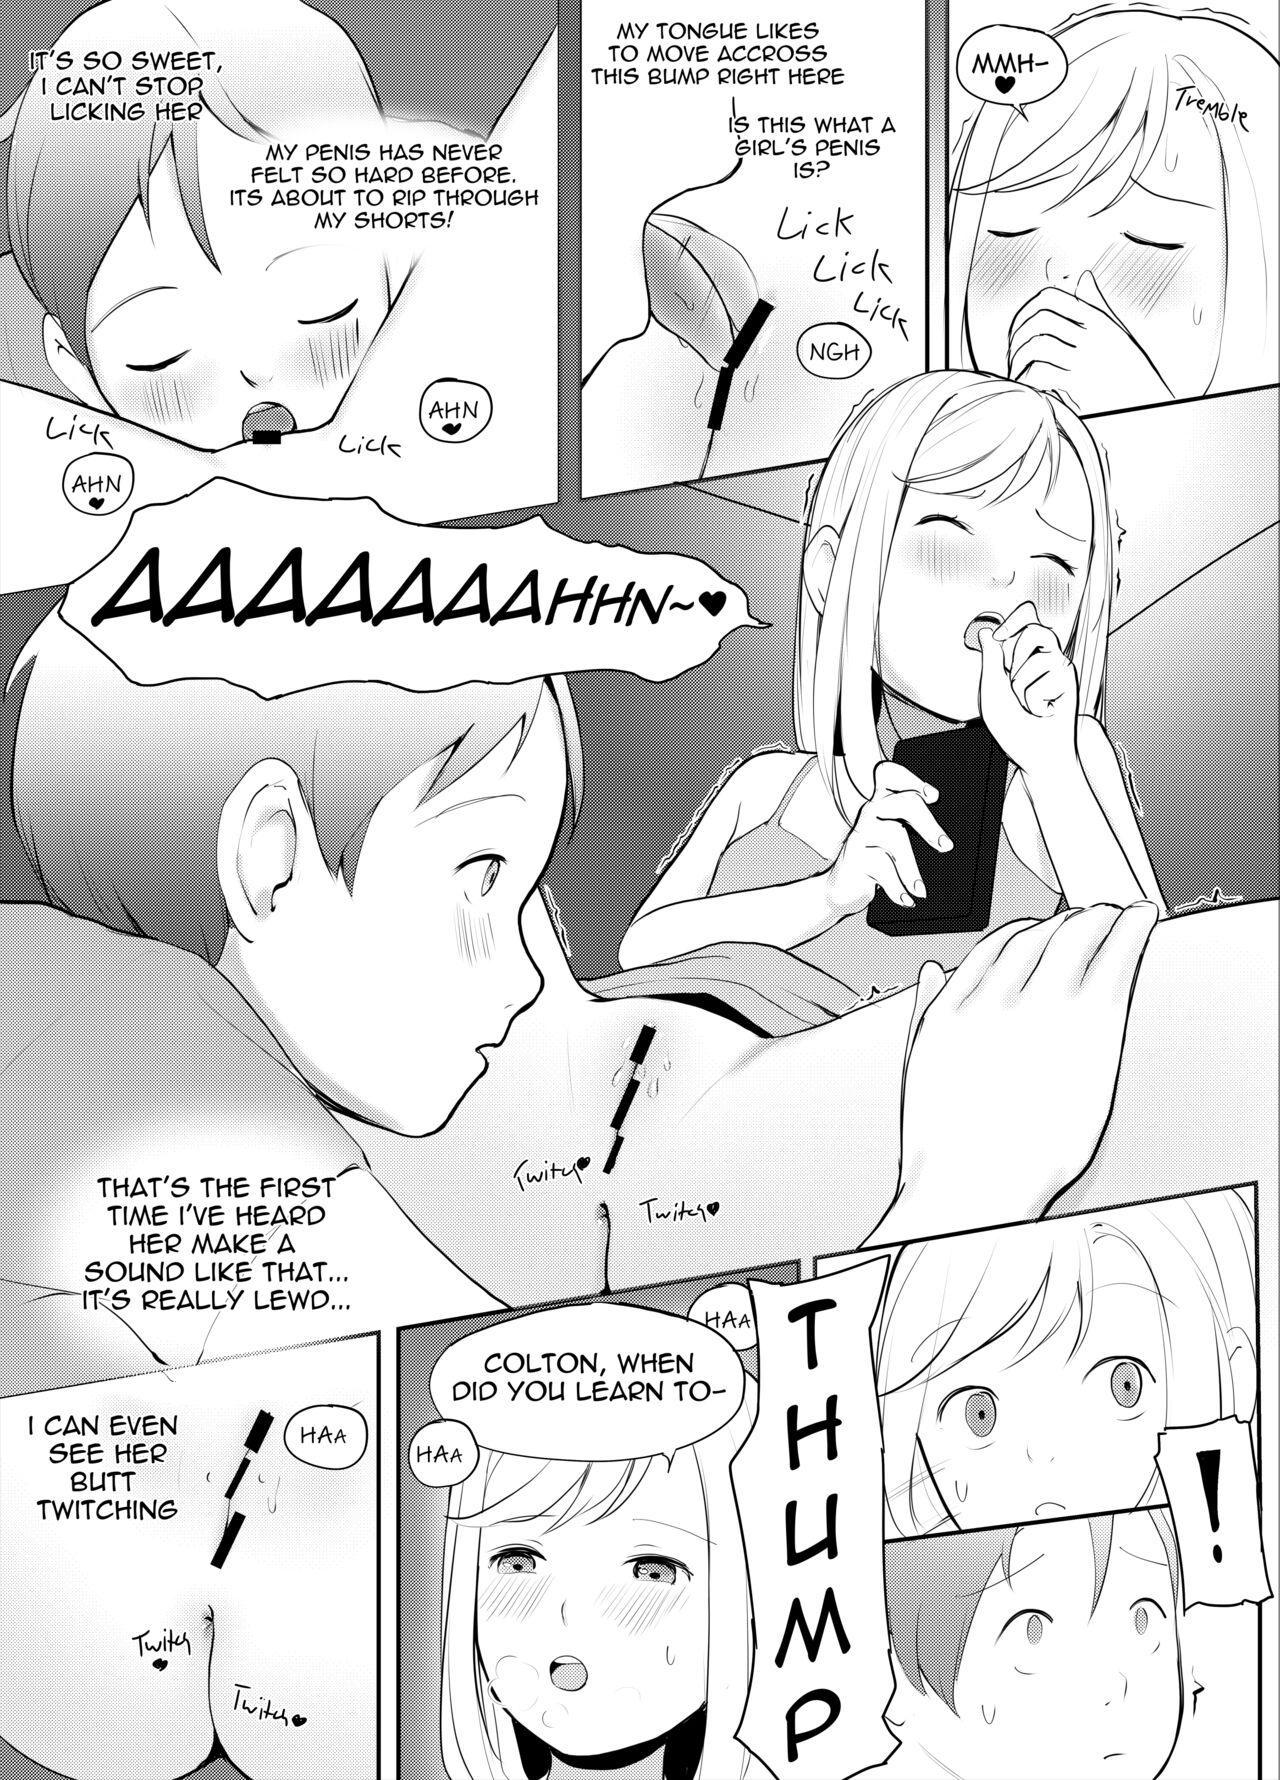 Blowjob Passing the Time - Original Fucking - Page 7